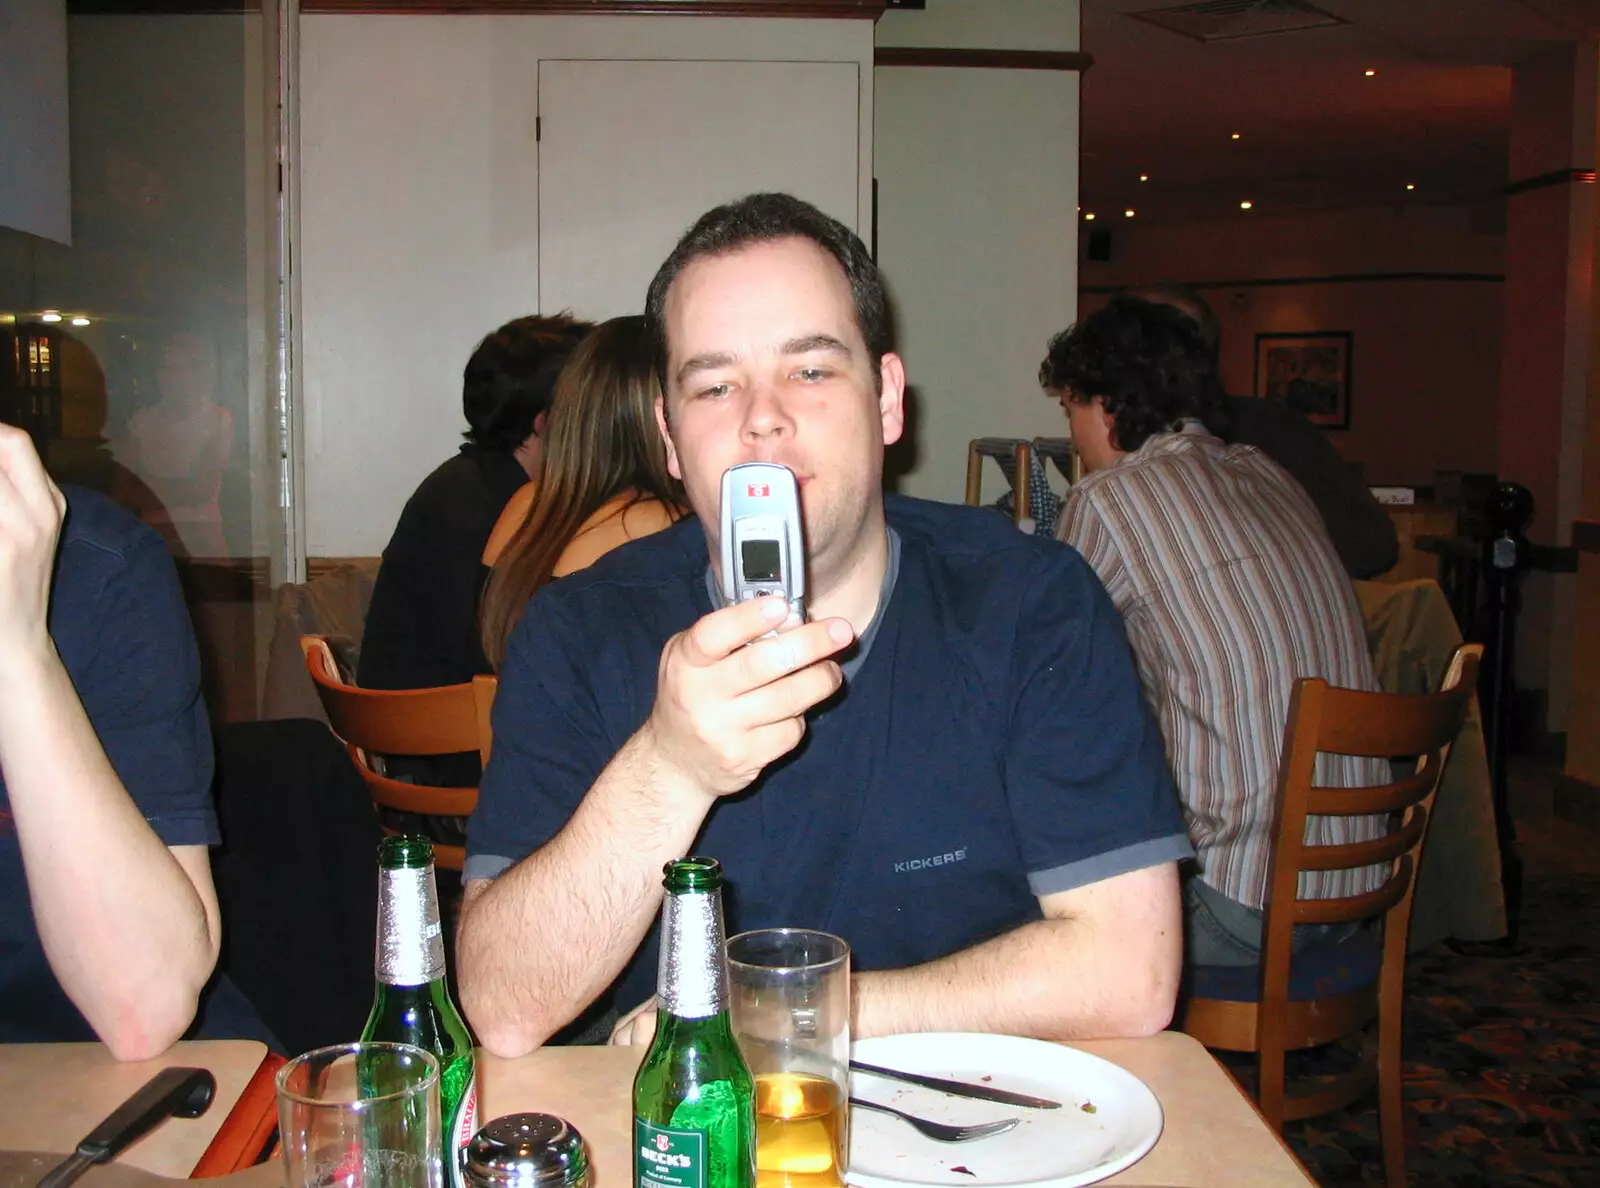 Russell checks his phone out in Pizza Hut, Ipswich, from The SCC Social Club and the  Demolition of Diss Publishing, Ipswich and Diss - 2nd April 2005